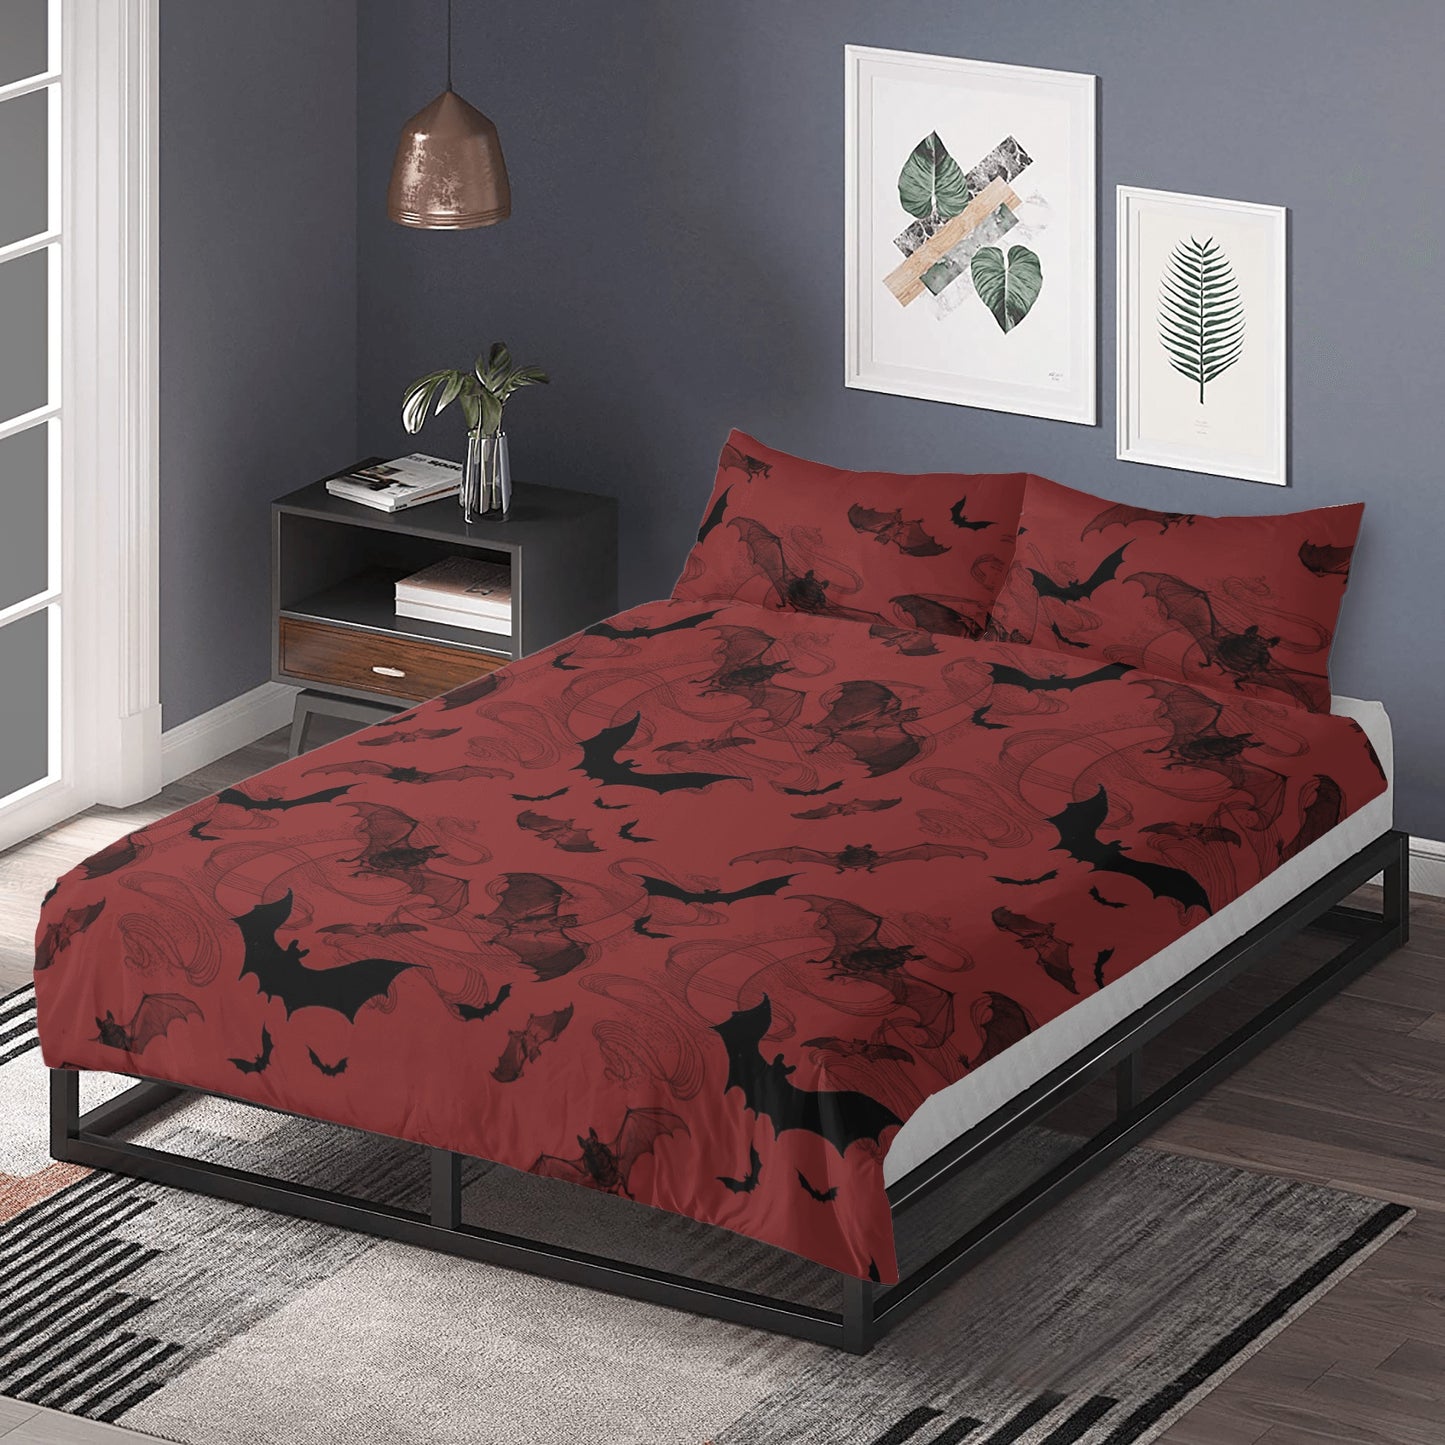 Gothic Bats On A Red 3 Pcs Beddings